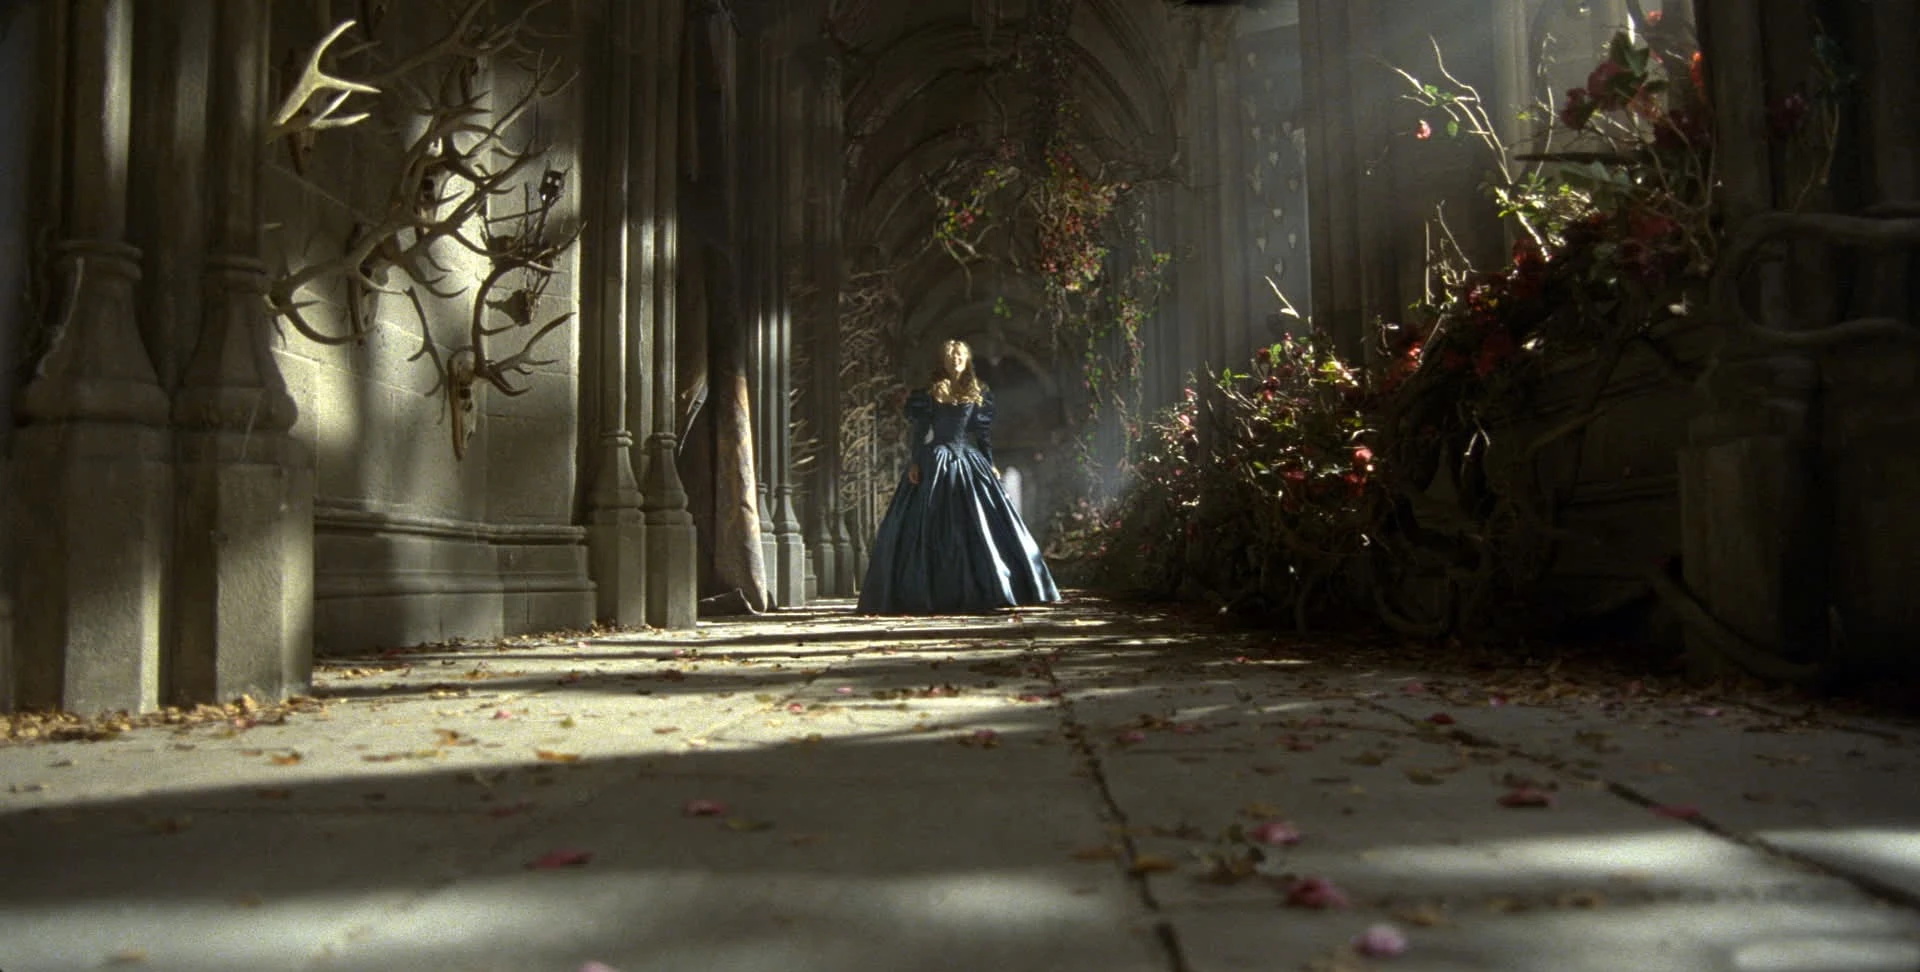 Beauty and the beast, Beauty in castle corridor Raynault vfx